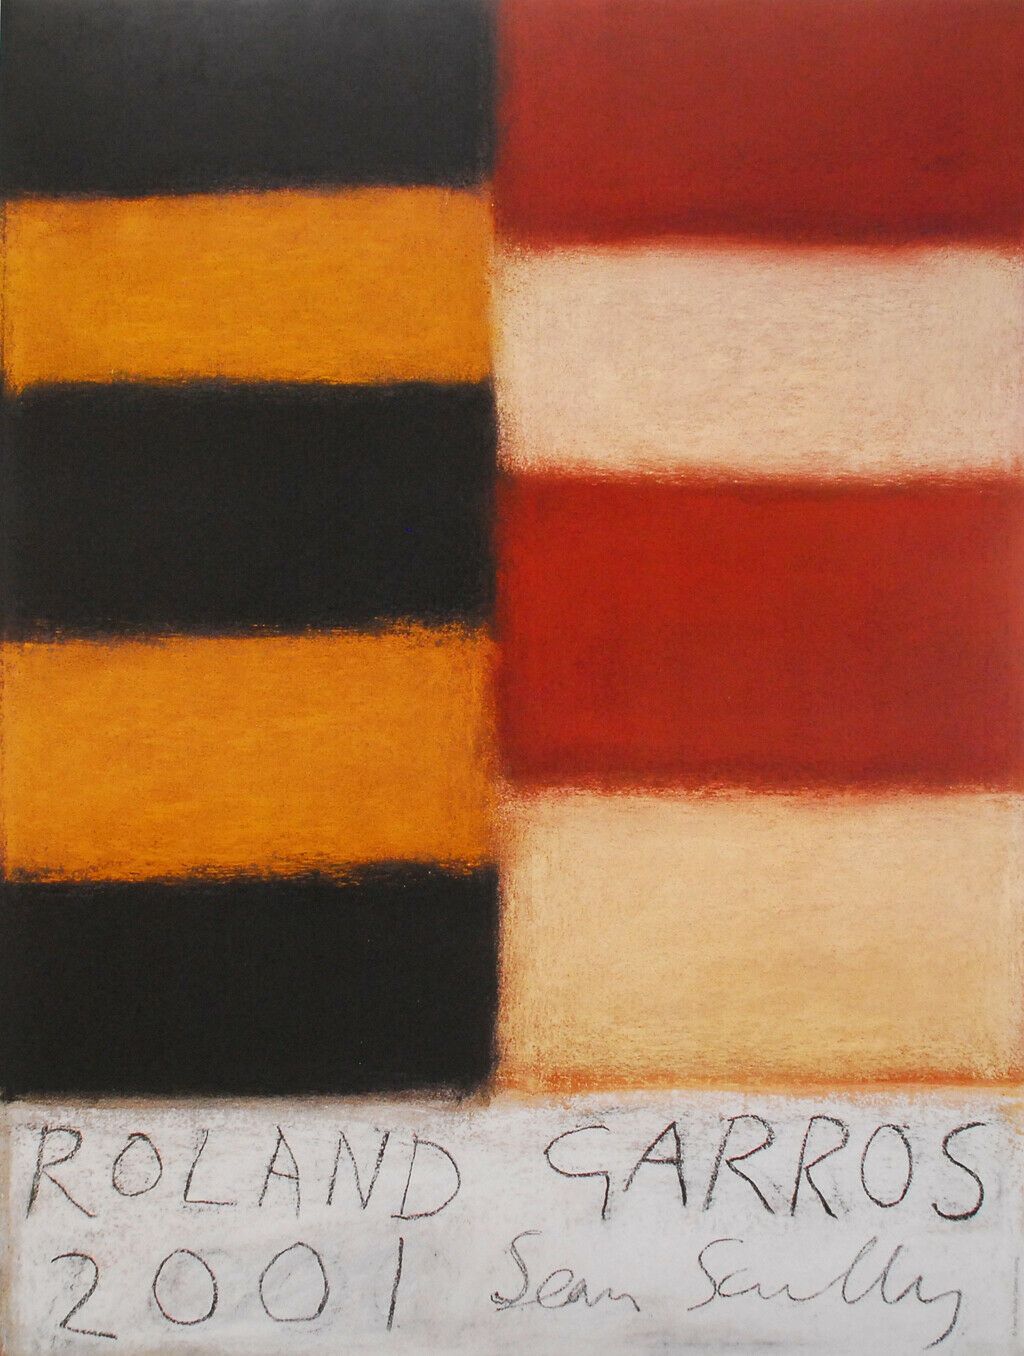 Sean Scully Sean Scully (1945)

Roland Garros, 2001

Offset print published by G&hellip;